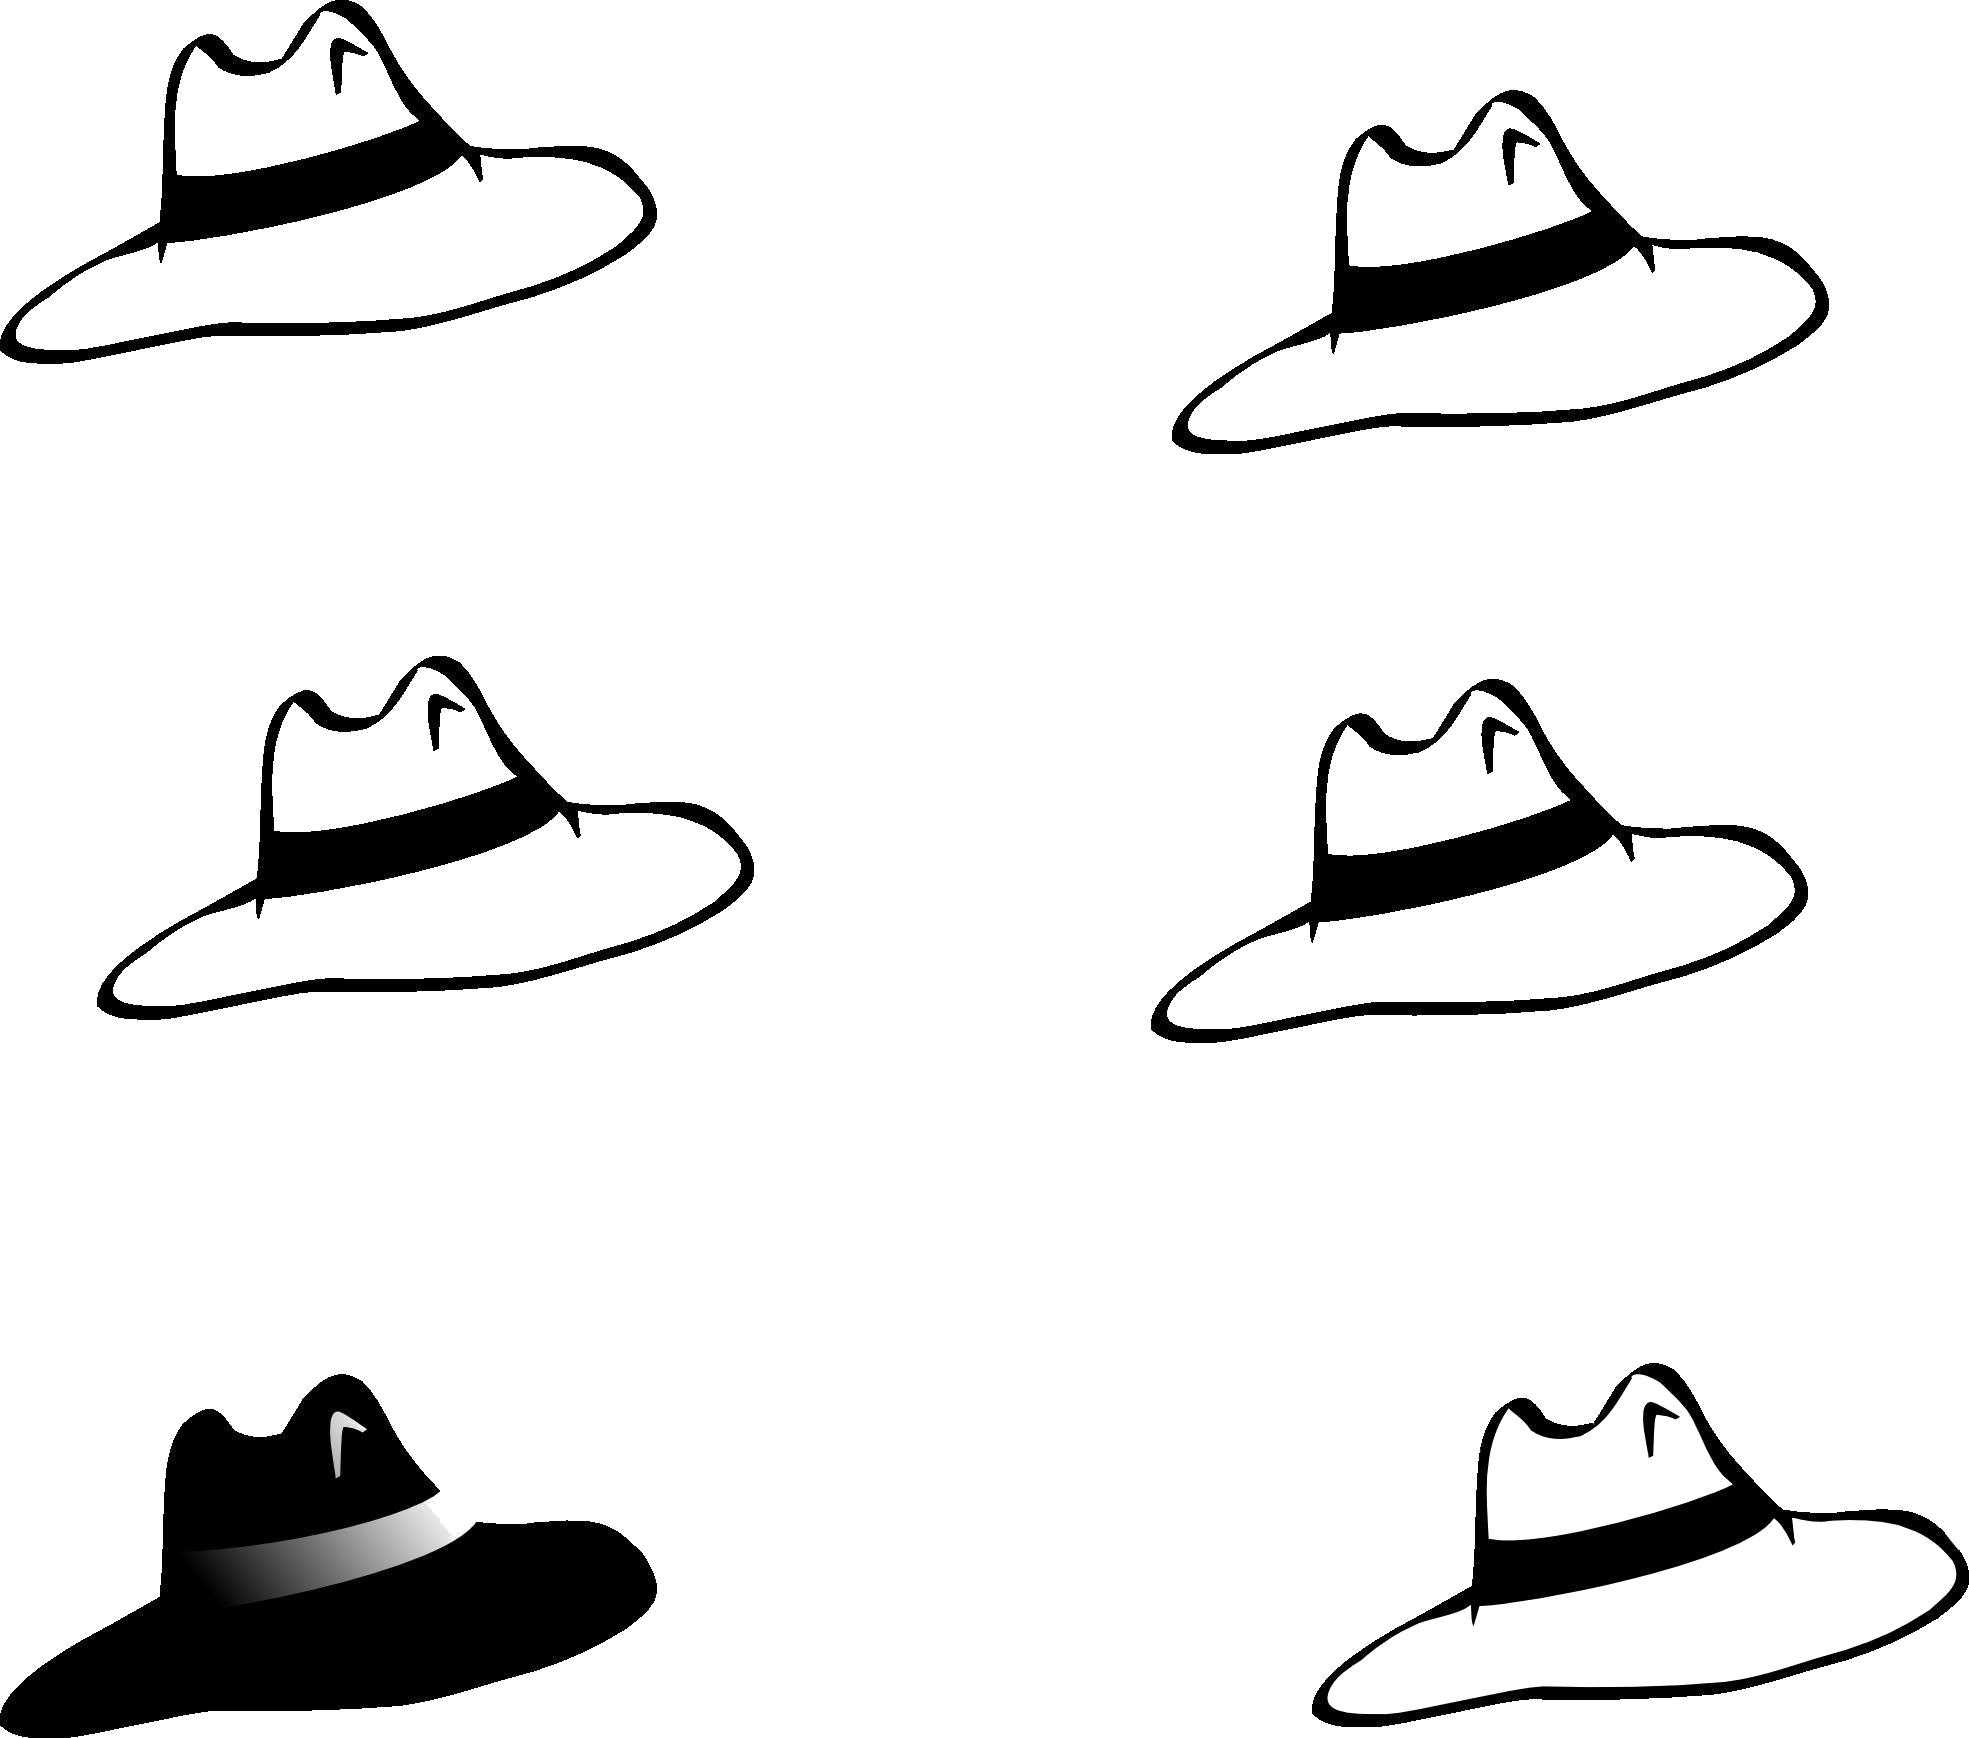 Coloring Five white hats and one black hat. Category Clothing. Tags:  hat, Golovnyova.